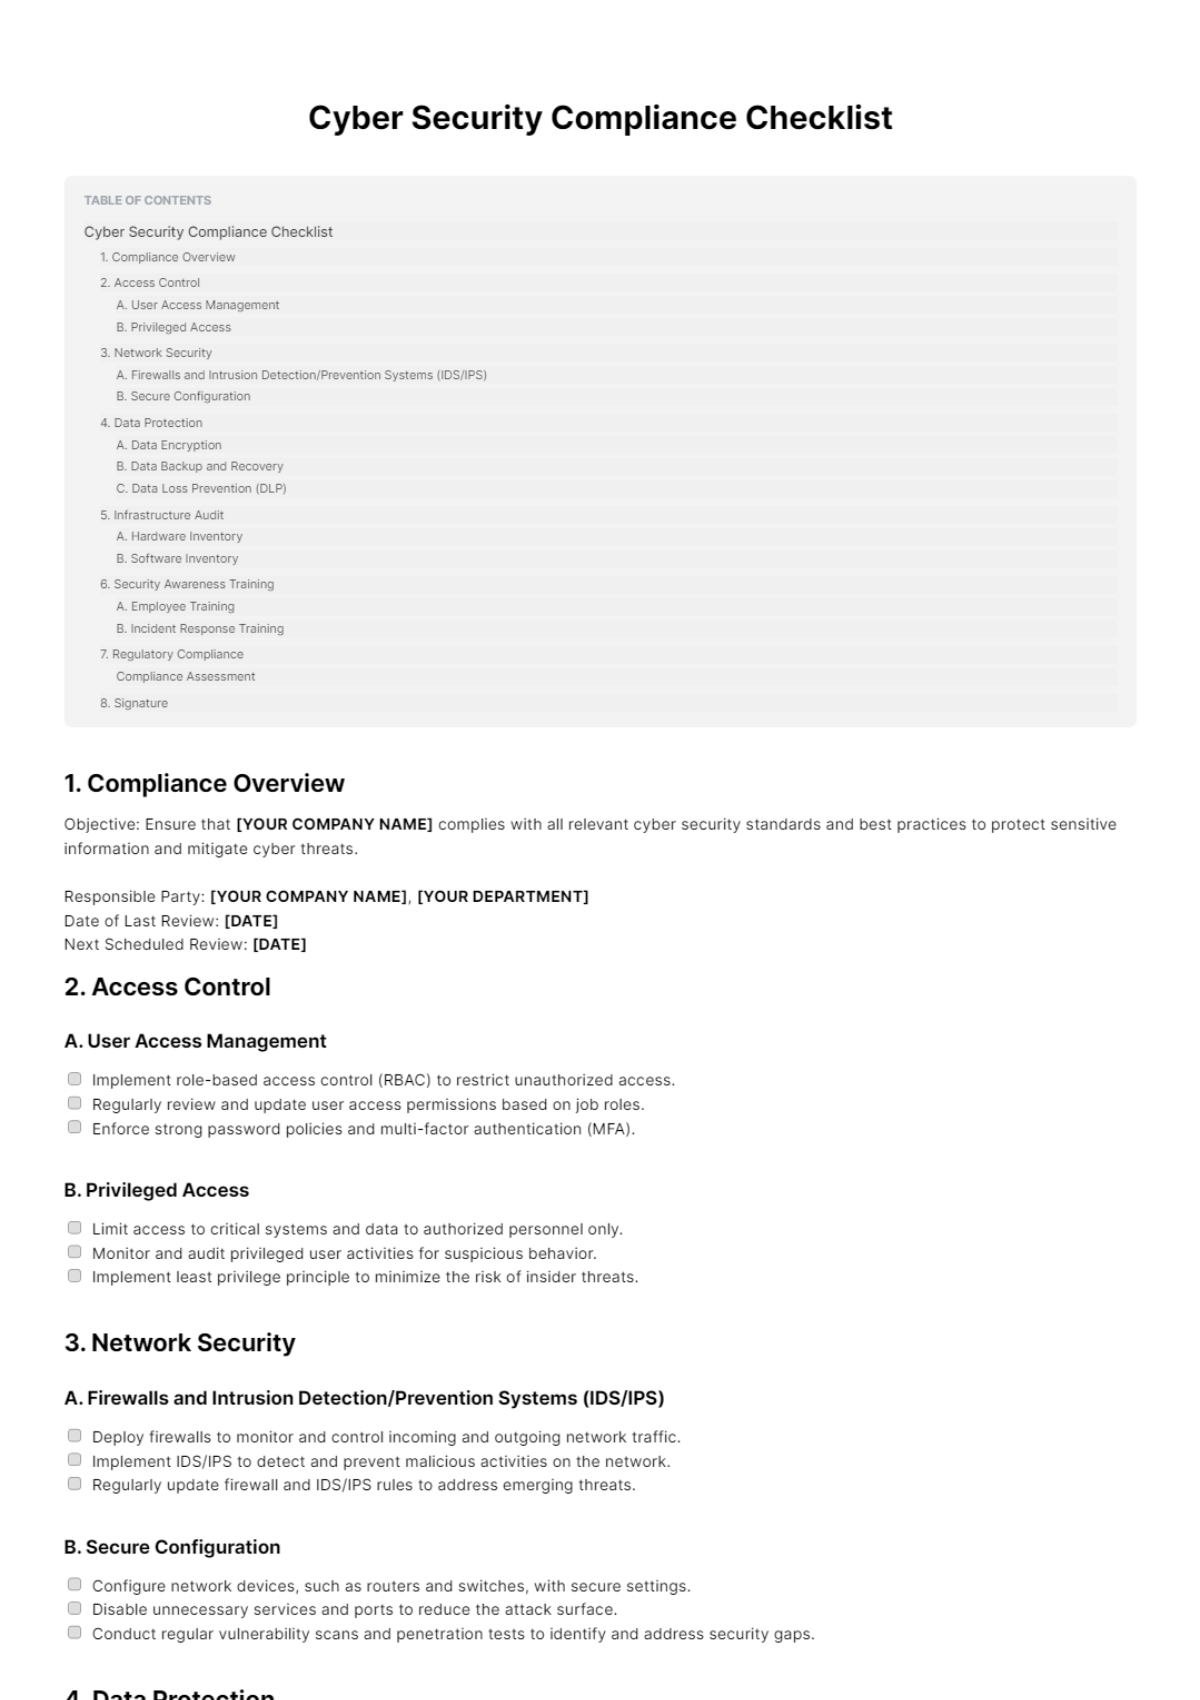 Cyber Security Compliance Checklist Template